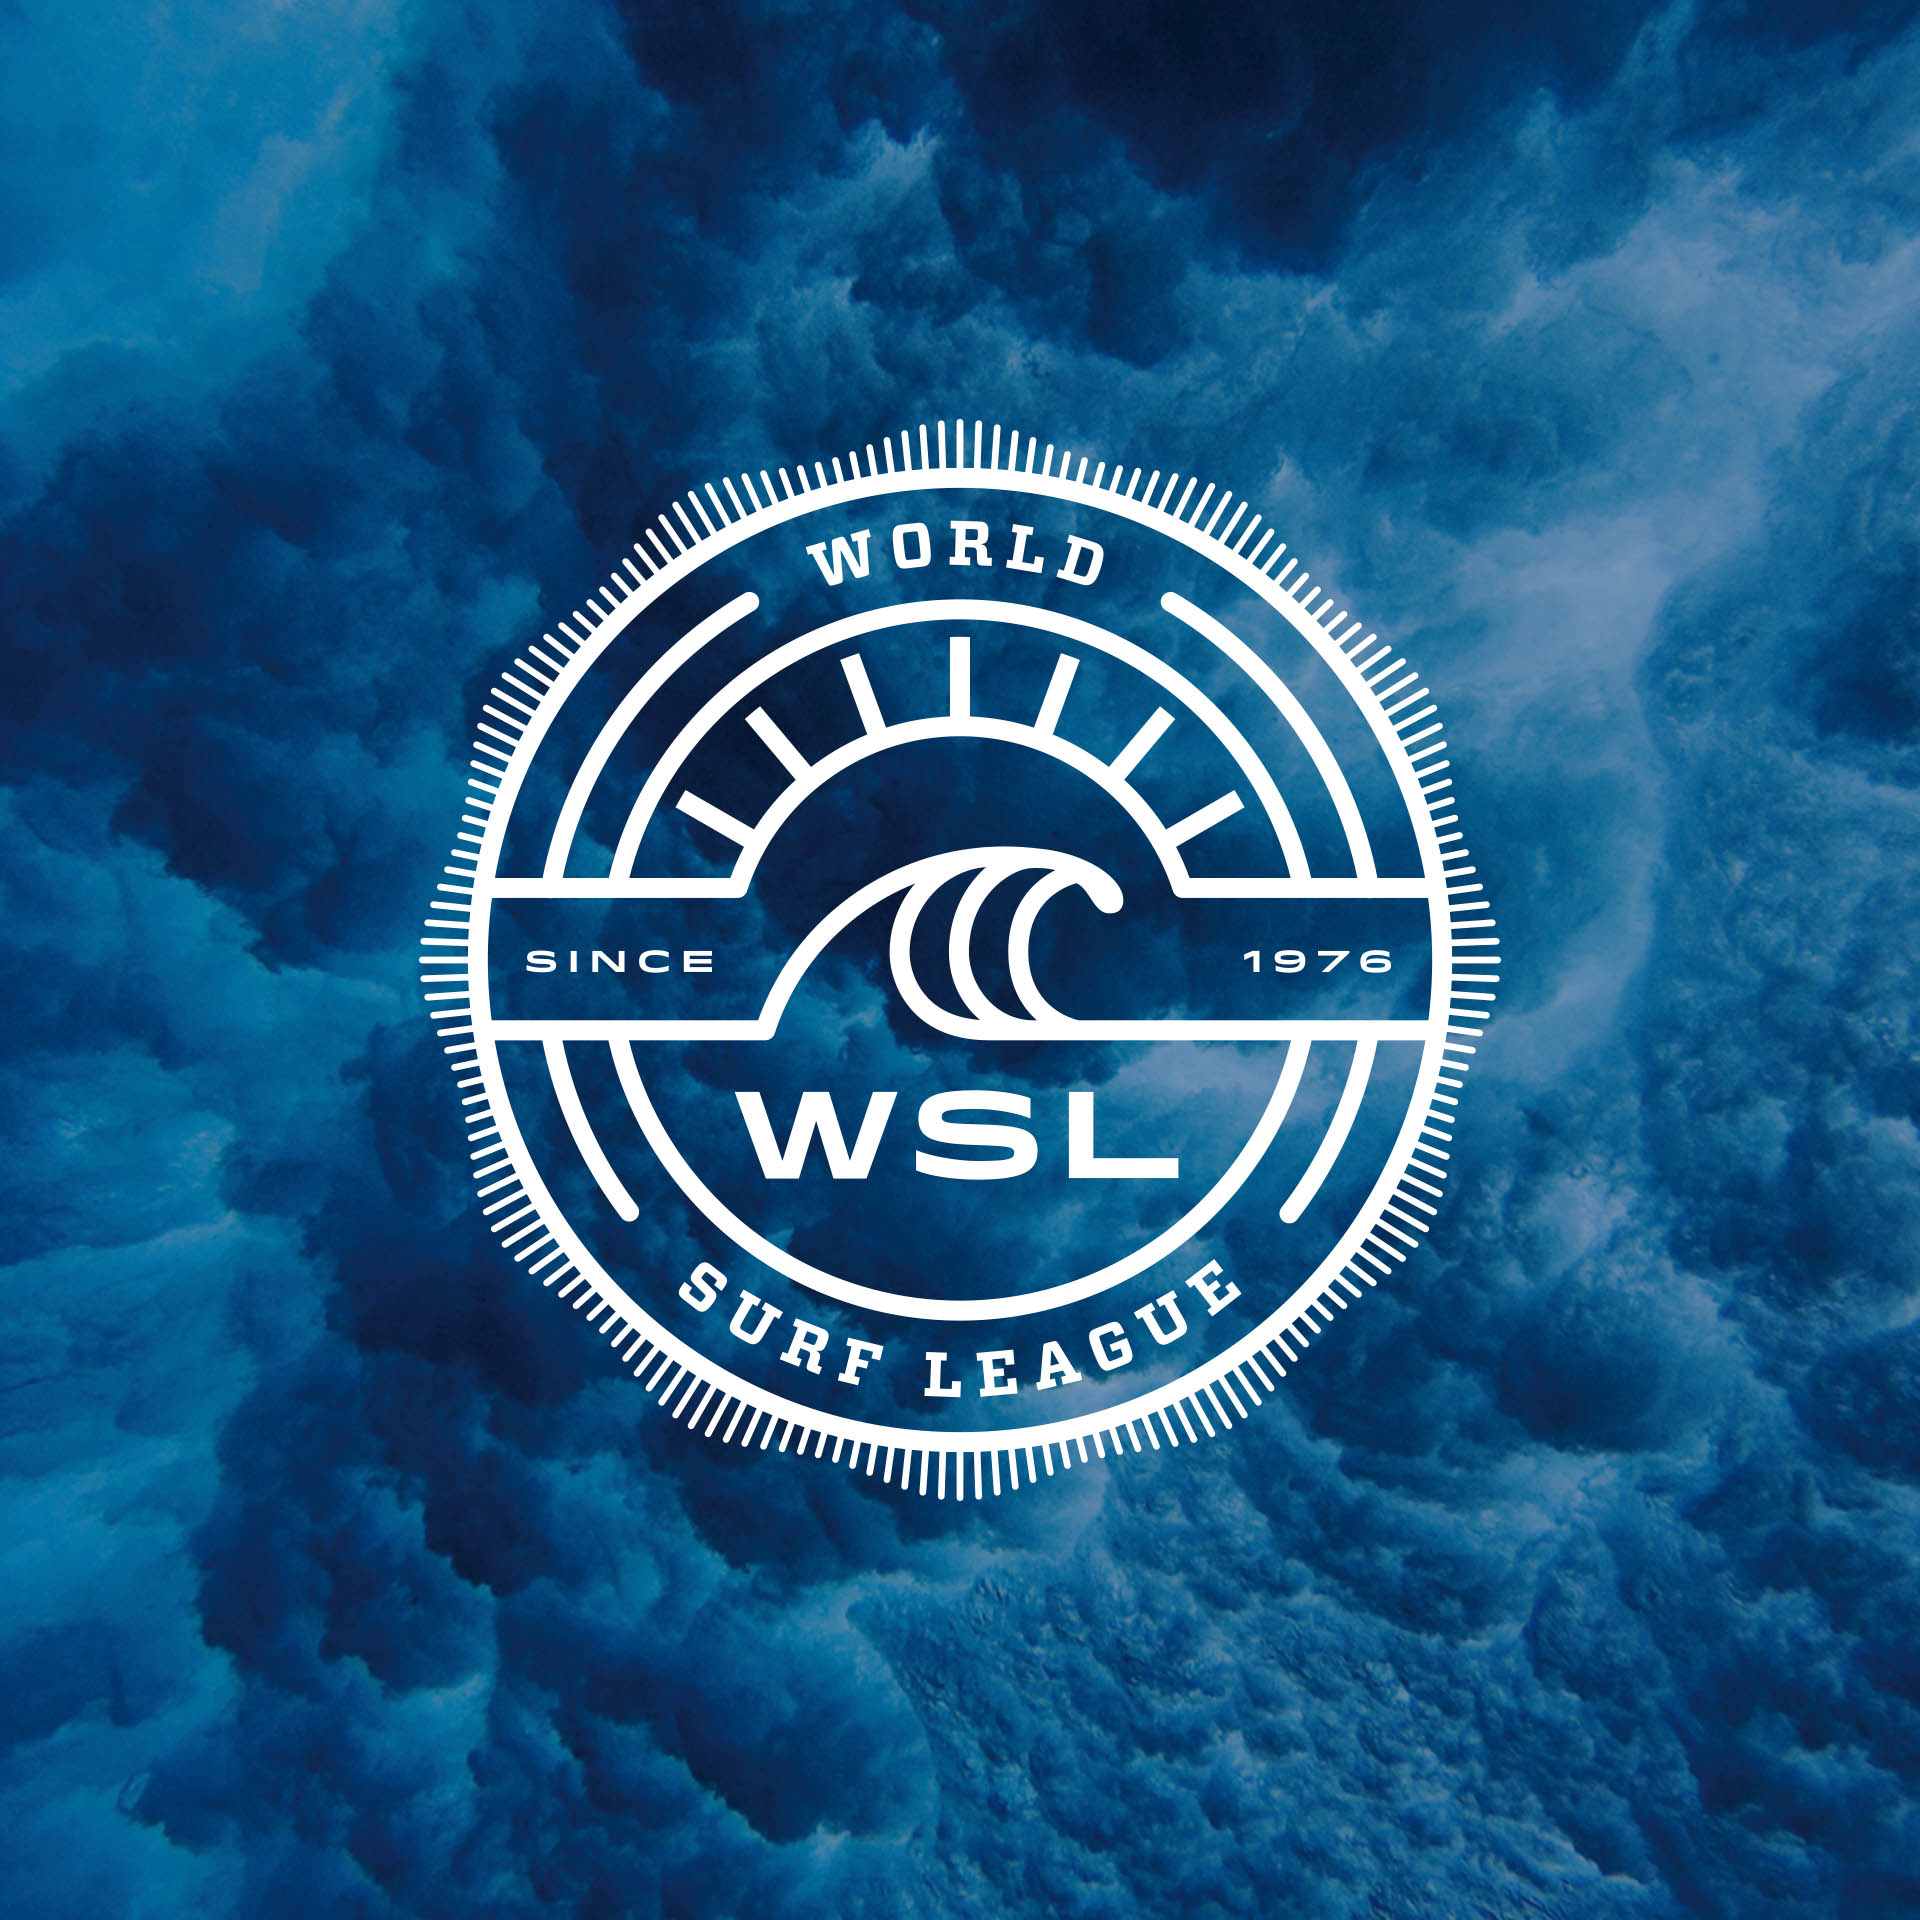 Design, branding and creative direction for the World Surf League